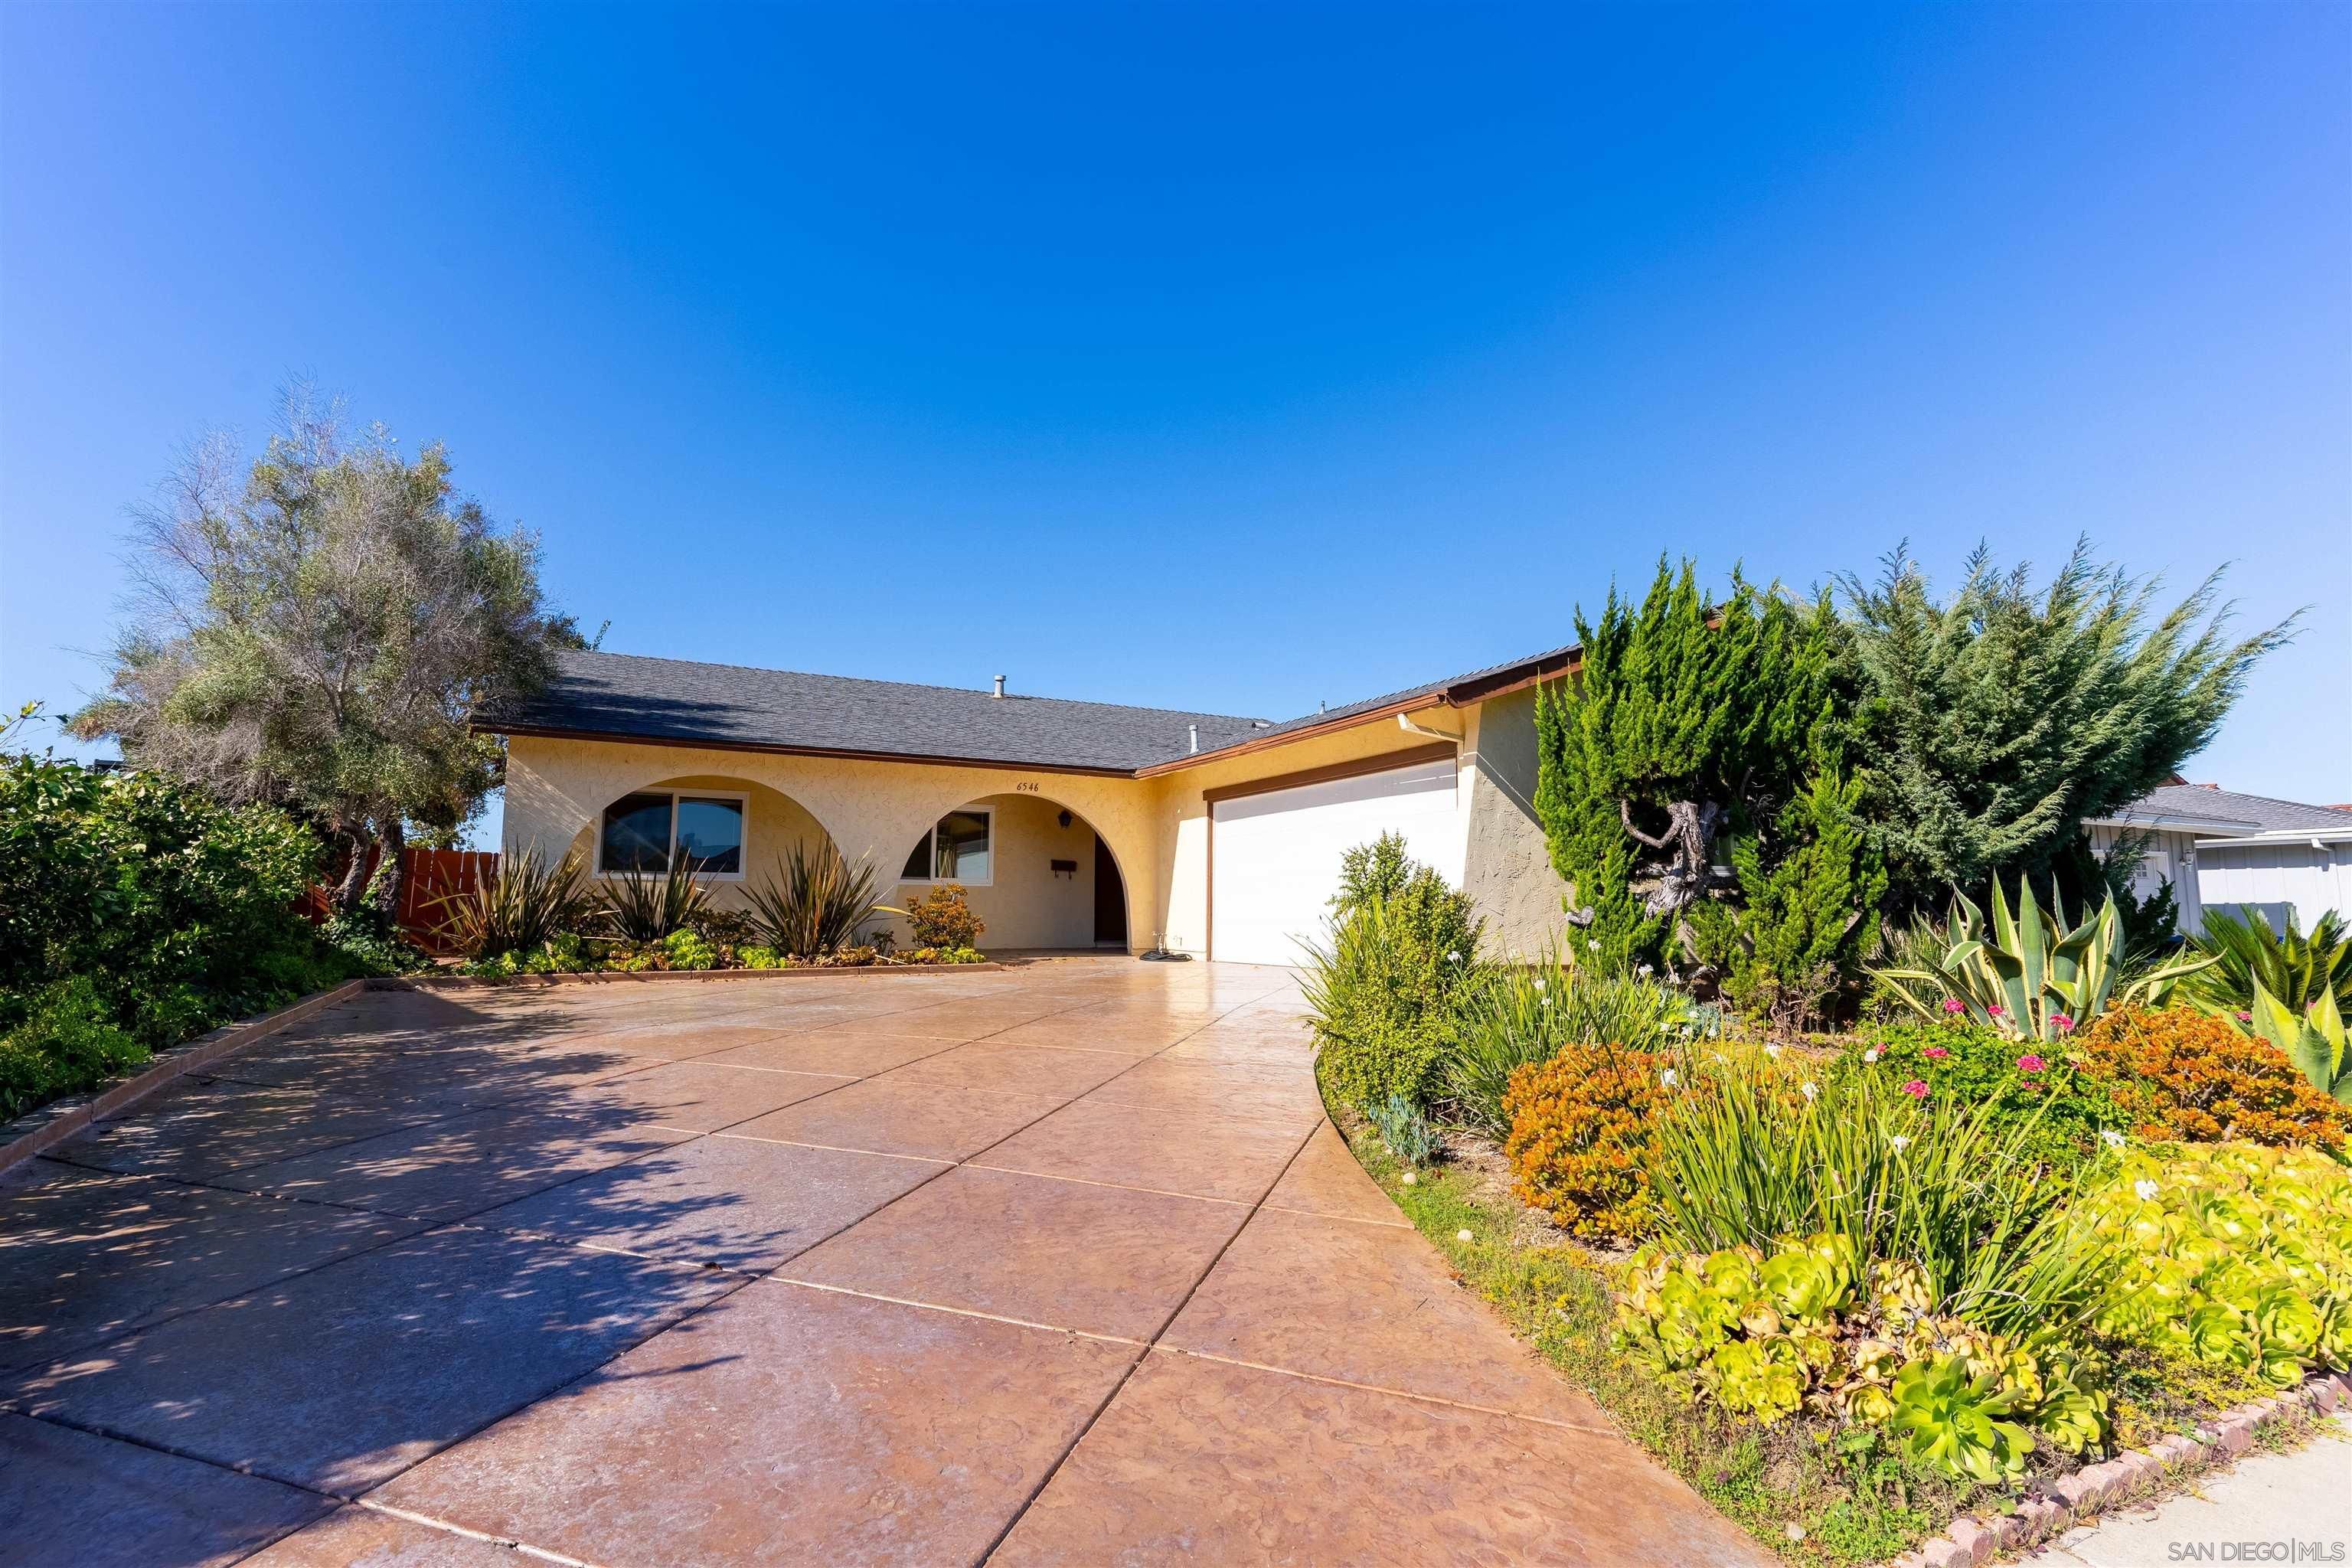 I have sold a property at 6546 Wellesly Pl in San Diego
